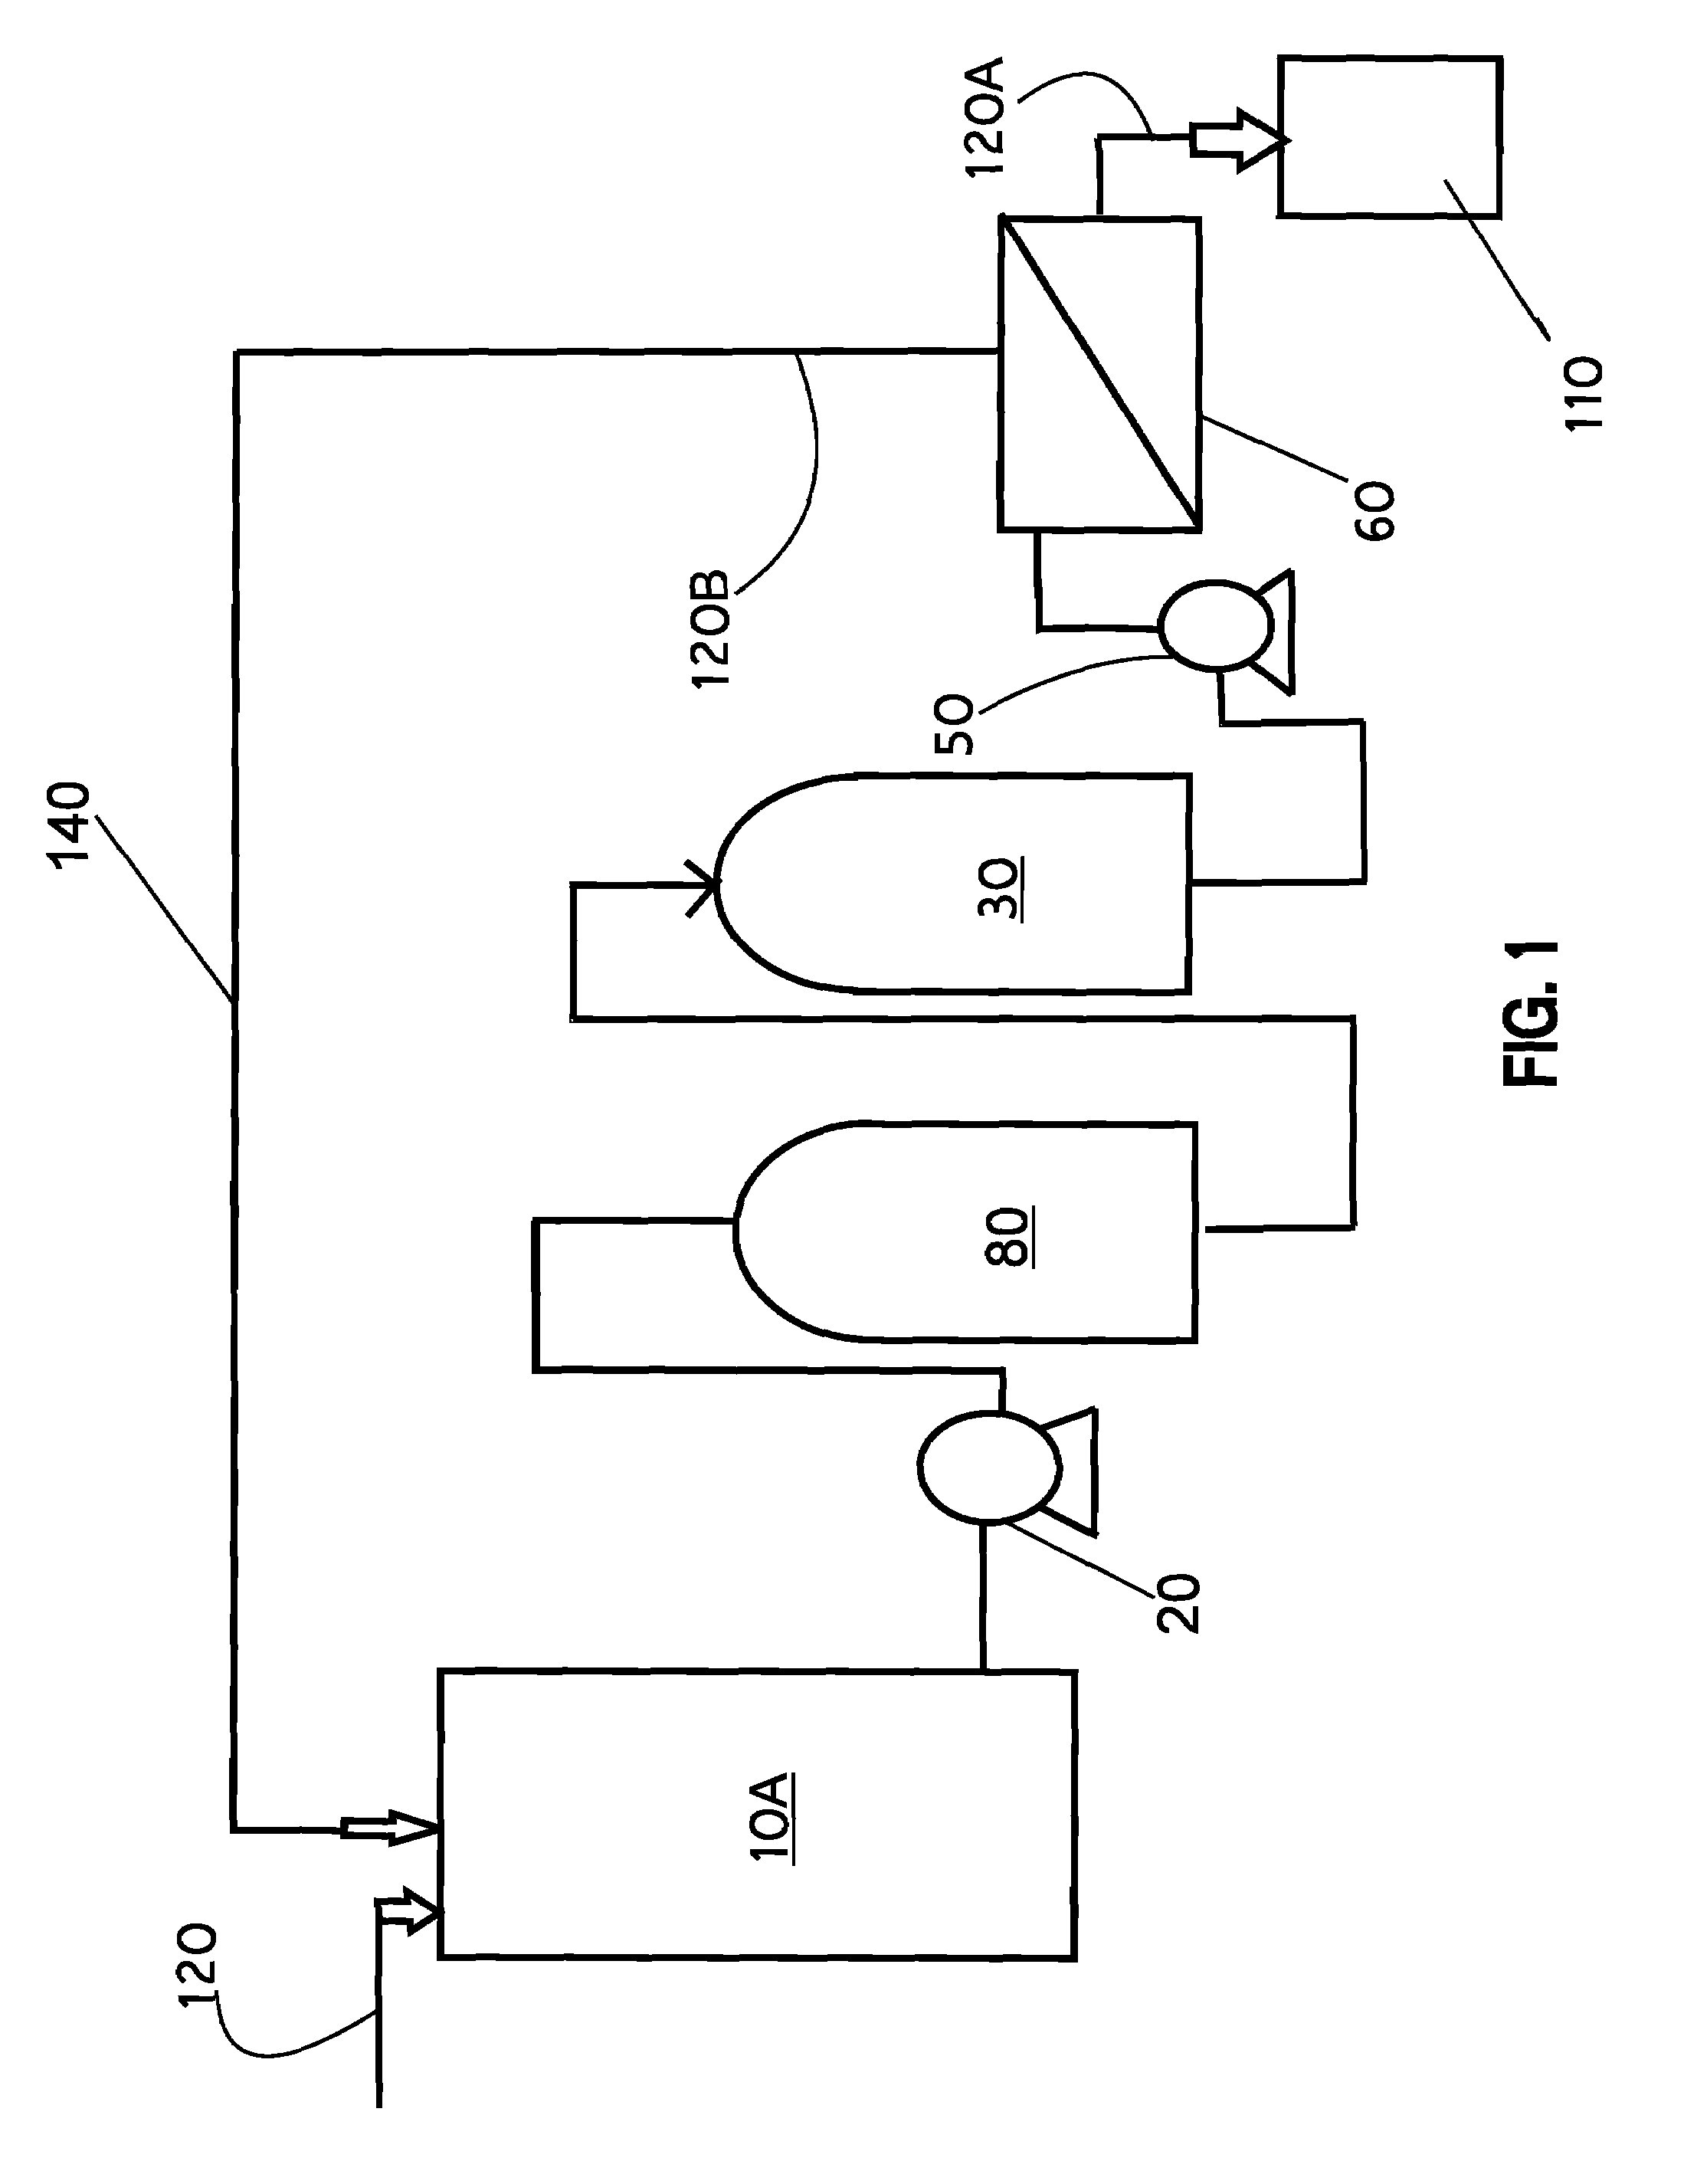 Method of rendering a radioactive and aqueous heat transfer liquid in a nuclear reactor to a reduced radwaste quantitative state and returning the remaining waste water volumes to an environmental release point for liquid effluents